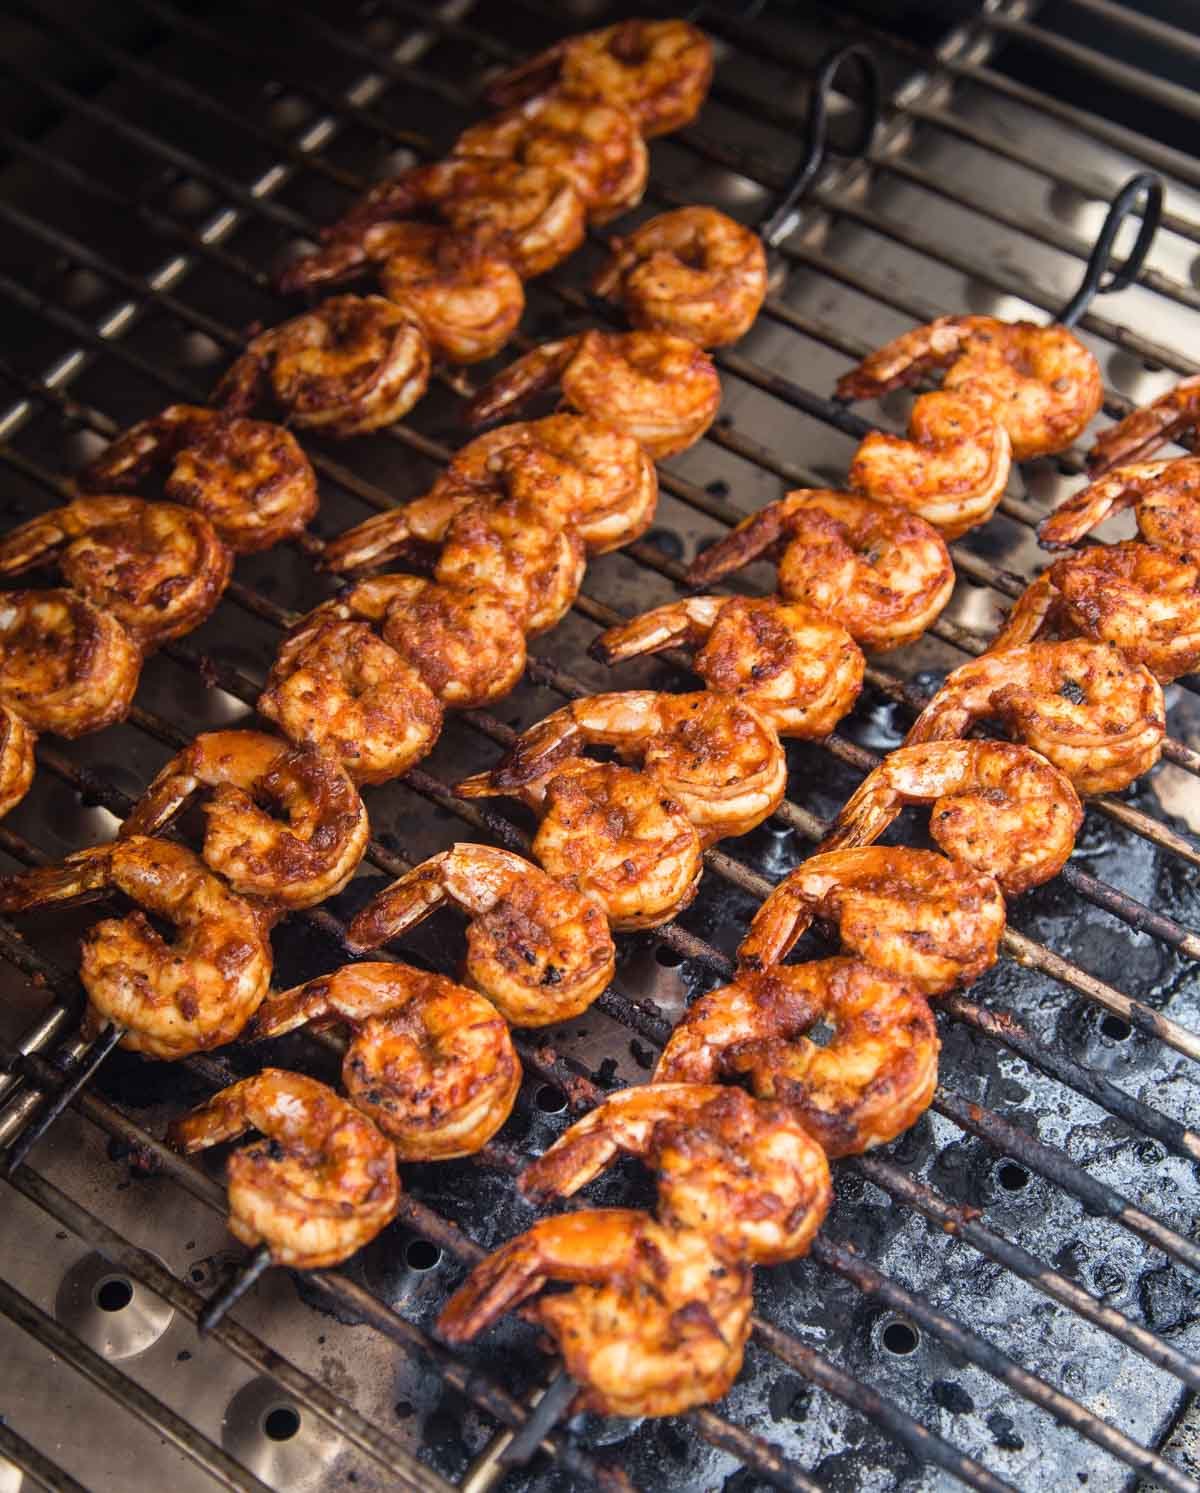 Shrimp skewers on the grill